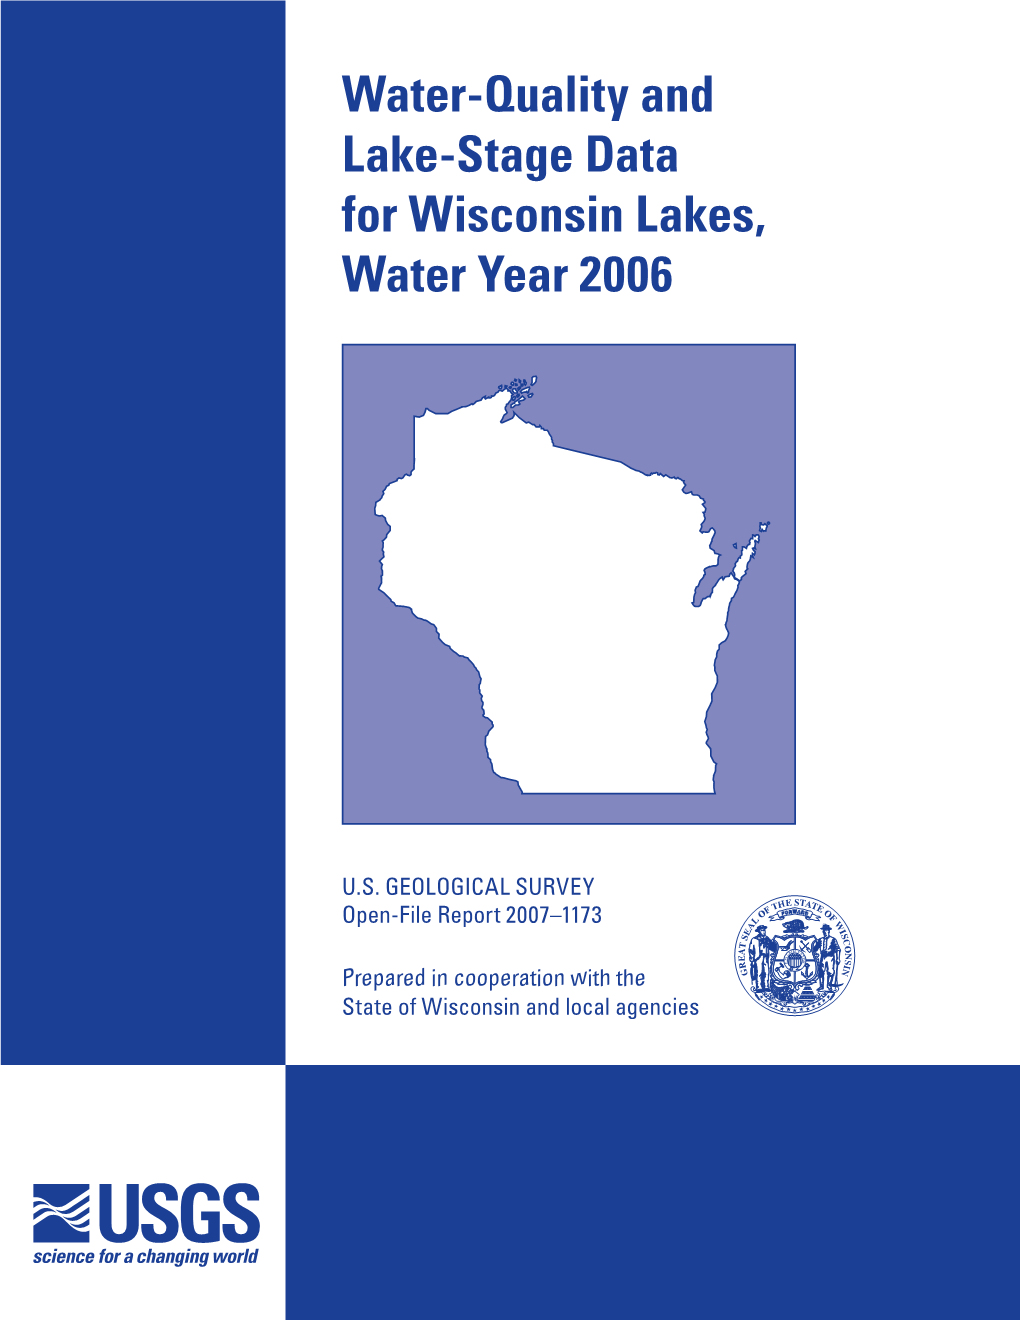 Water-Quality and Lake-Stage Data for Wisconsin Lakes, Water Year 2006